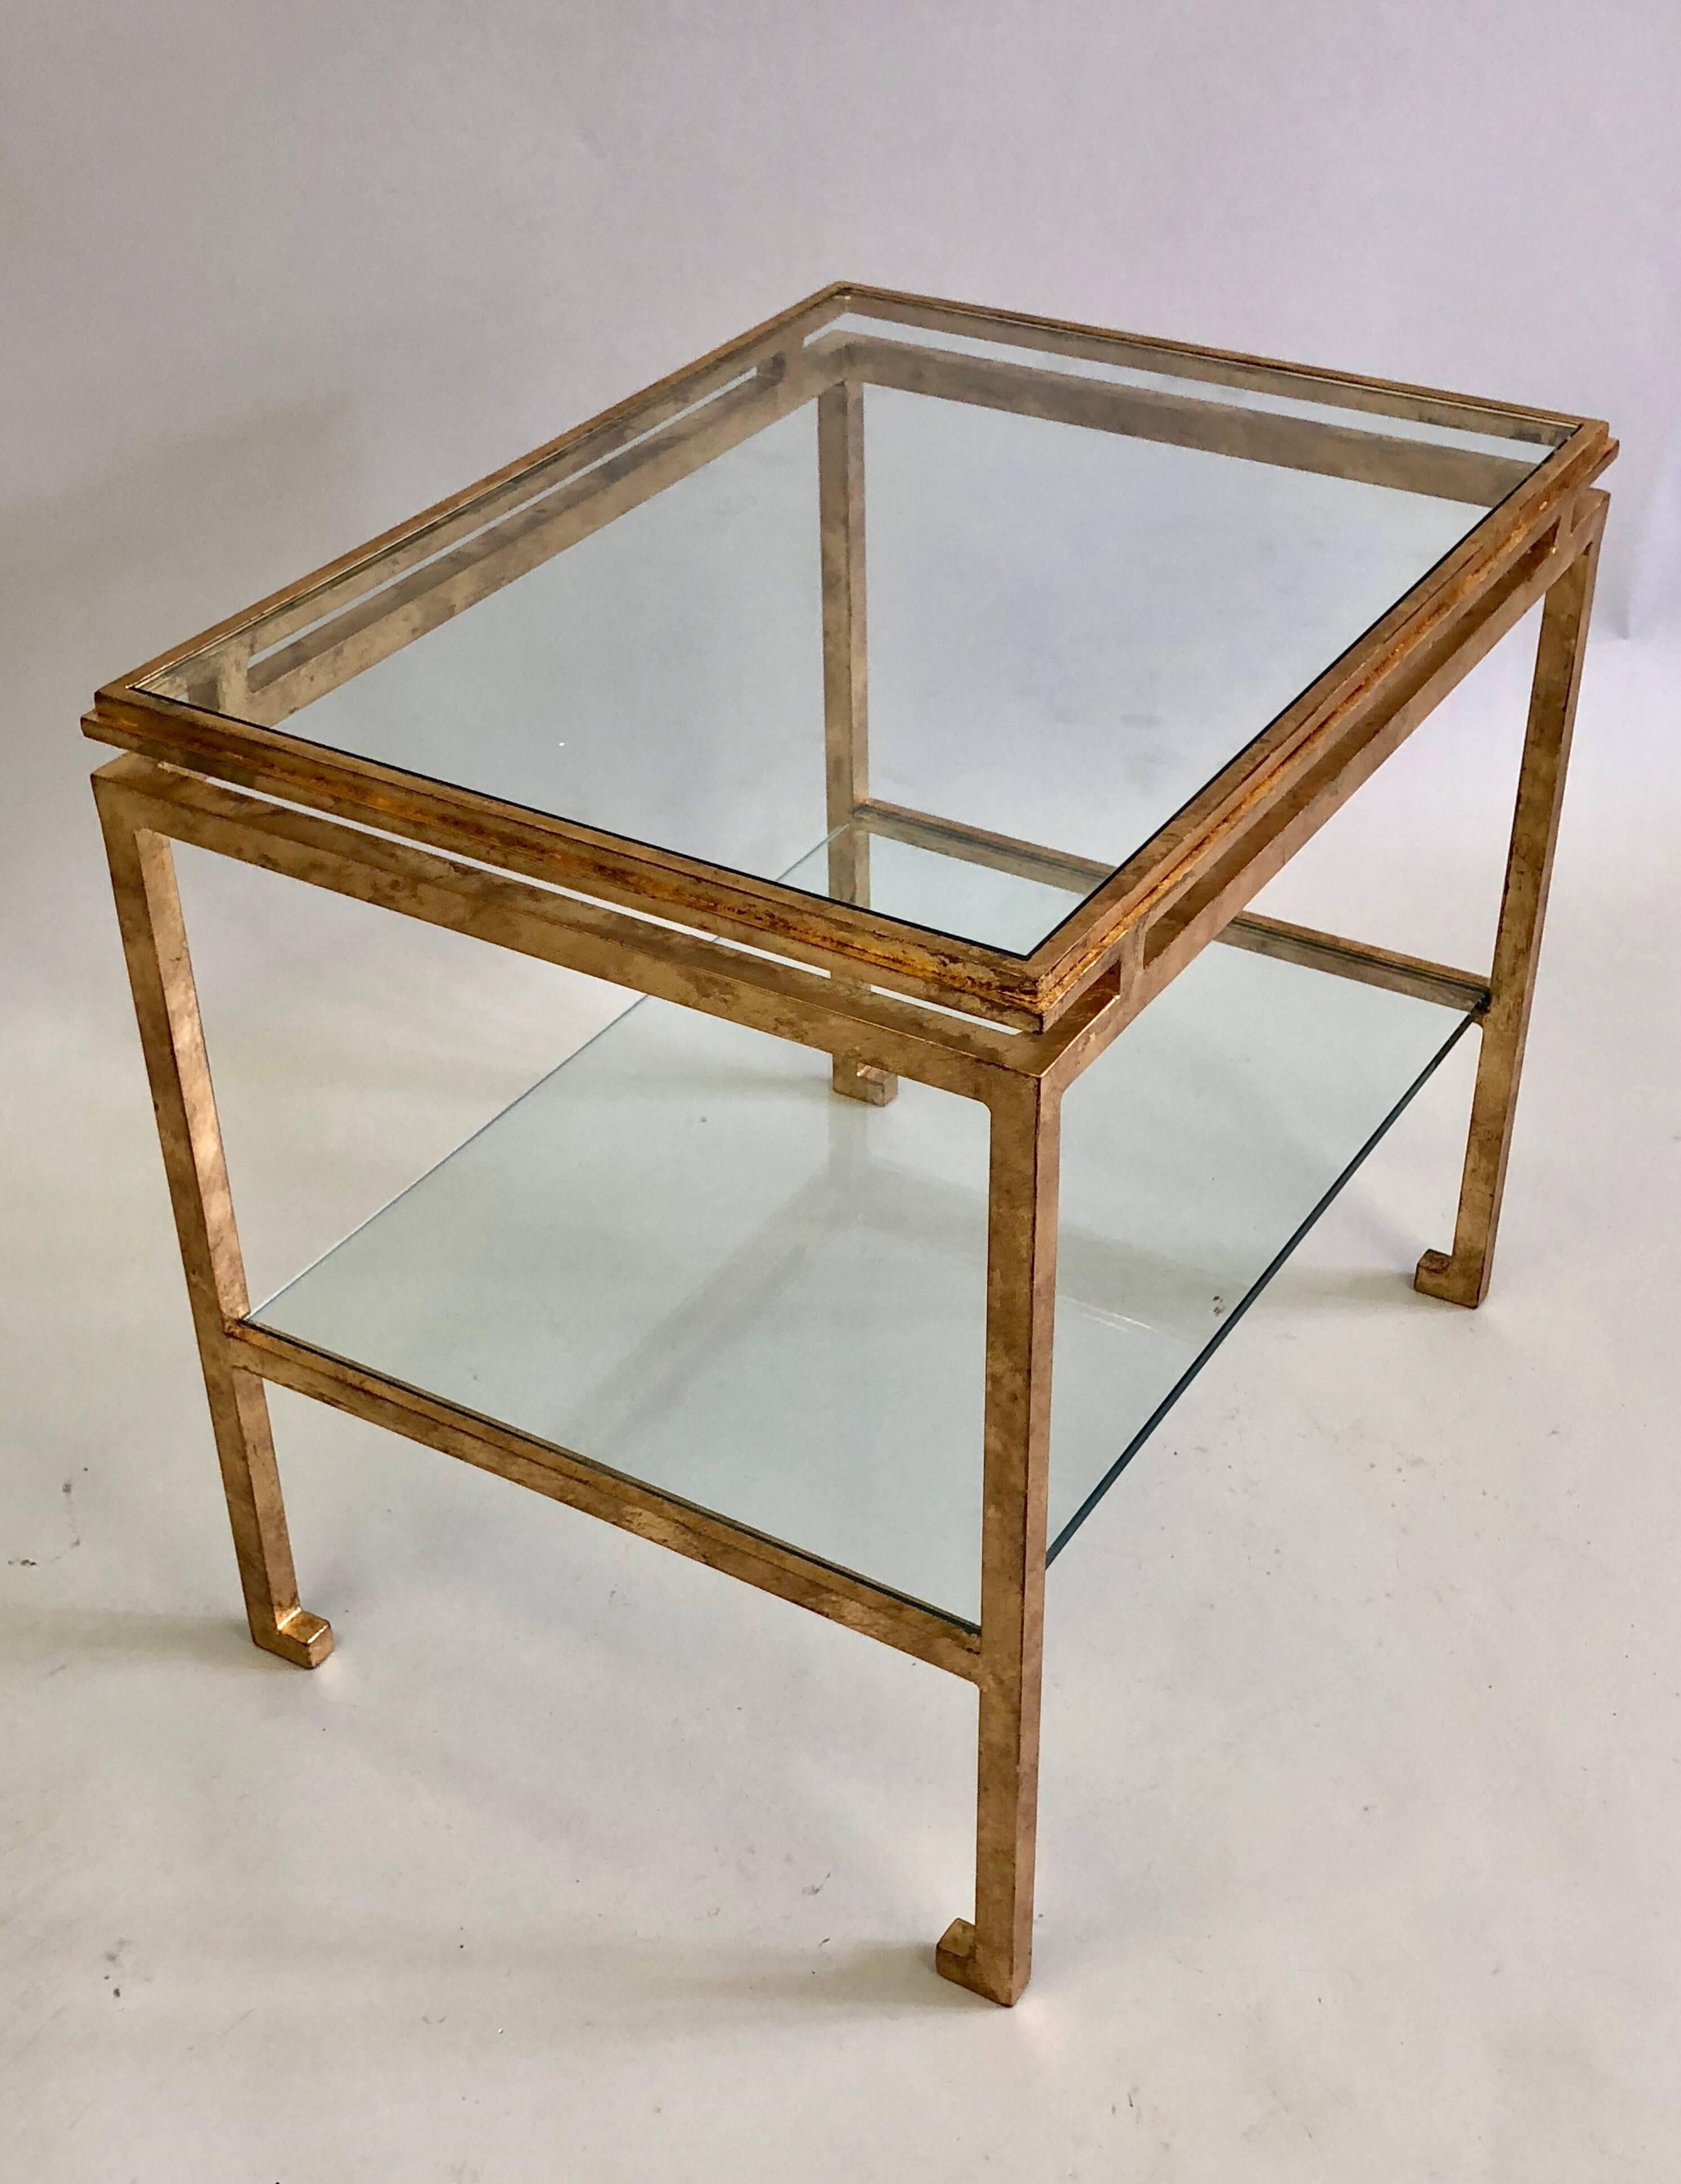 Elegant, timeless pair of French Mid-Century Modern neoclassical gilt iron side / end tables by Maison Ramsay, 1940-1960.

These chic double level tables feature elegant, seem-less detailed construction, the Classic Ramsay turned in feet and